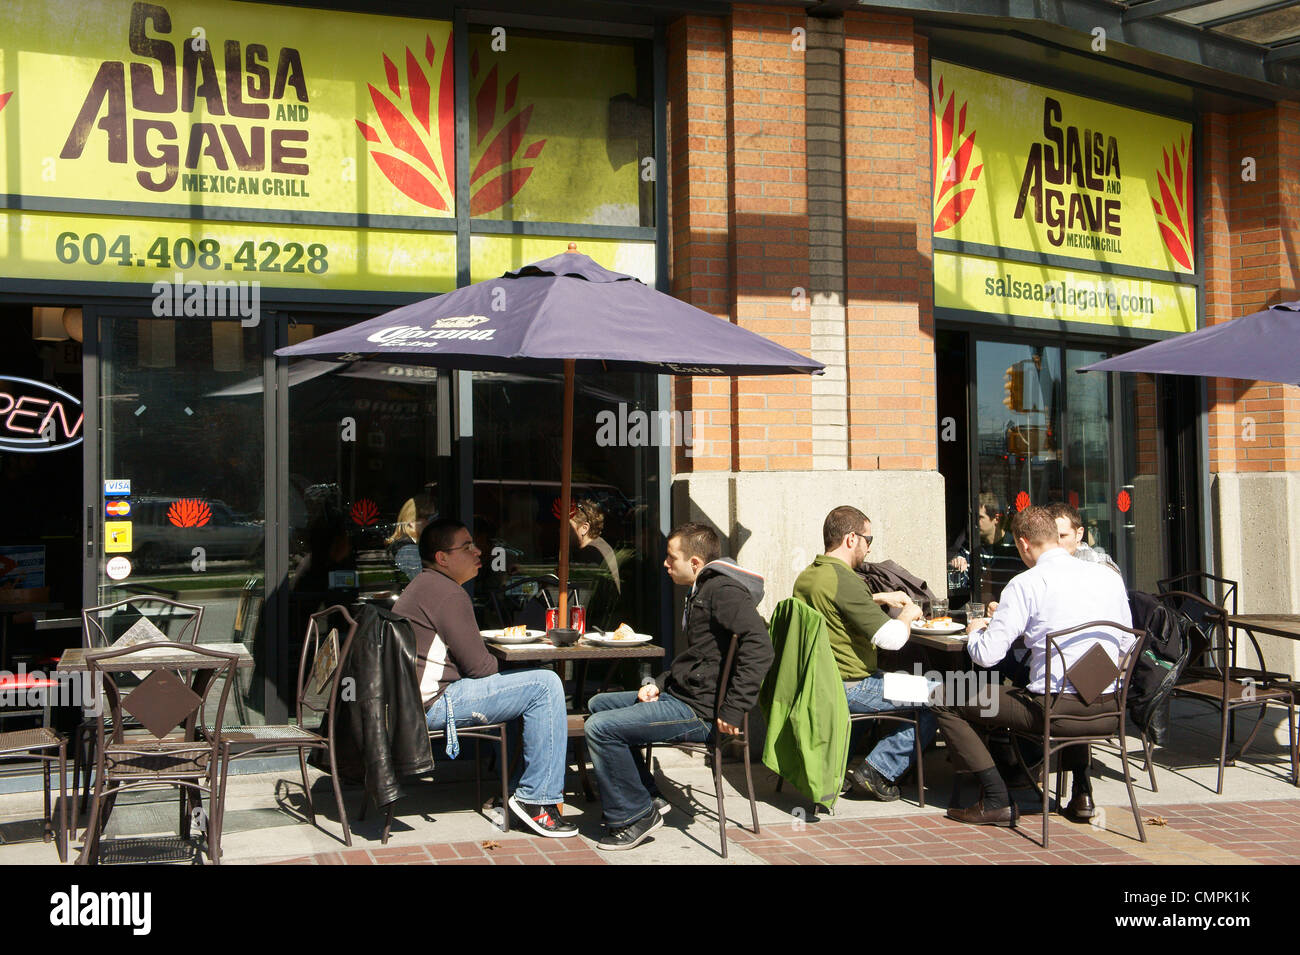 People eating outdoors at Salsa and Agave Mexican restaurant in Yaletown, Vancouver, British Columbia, Canada Stock Photo